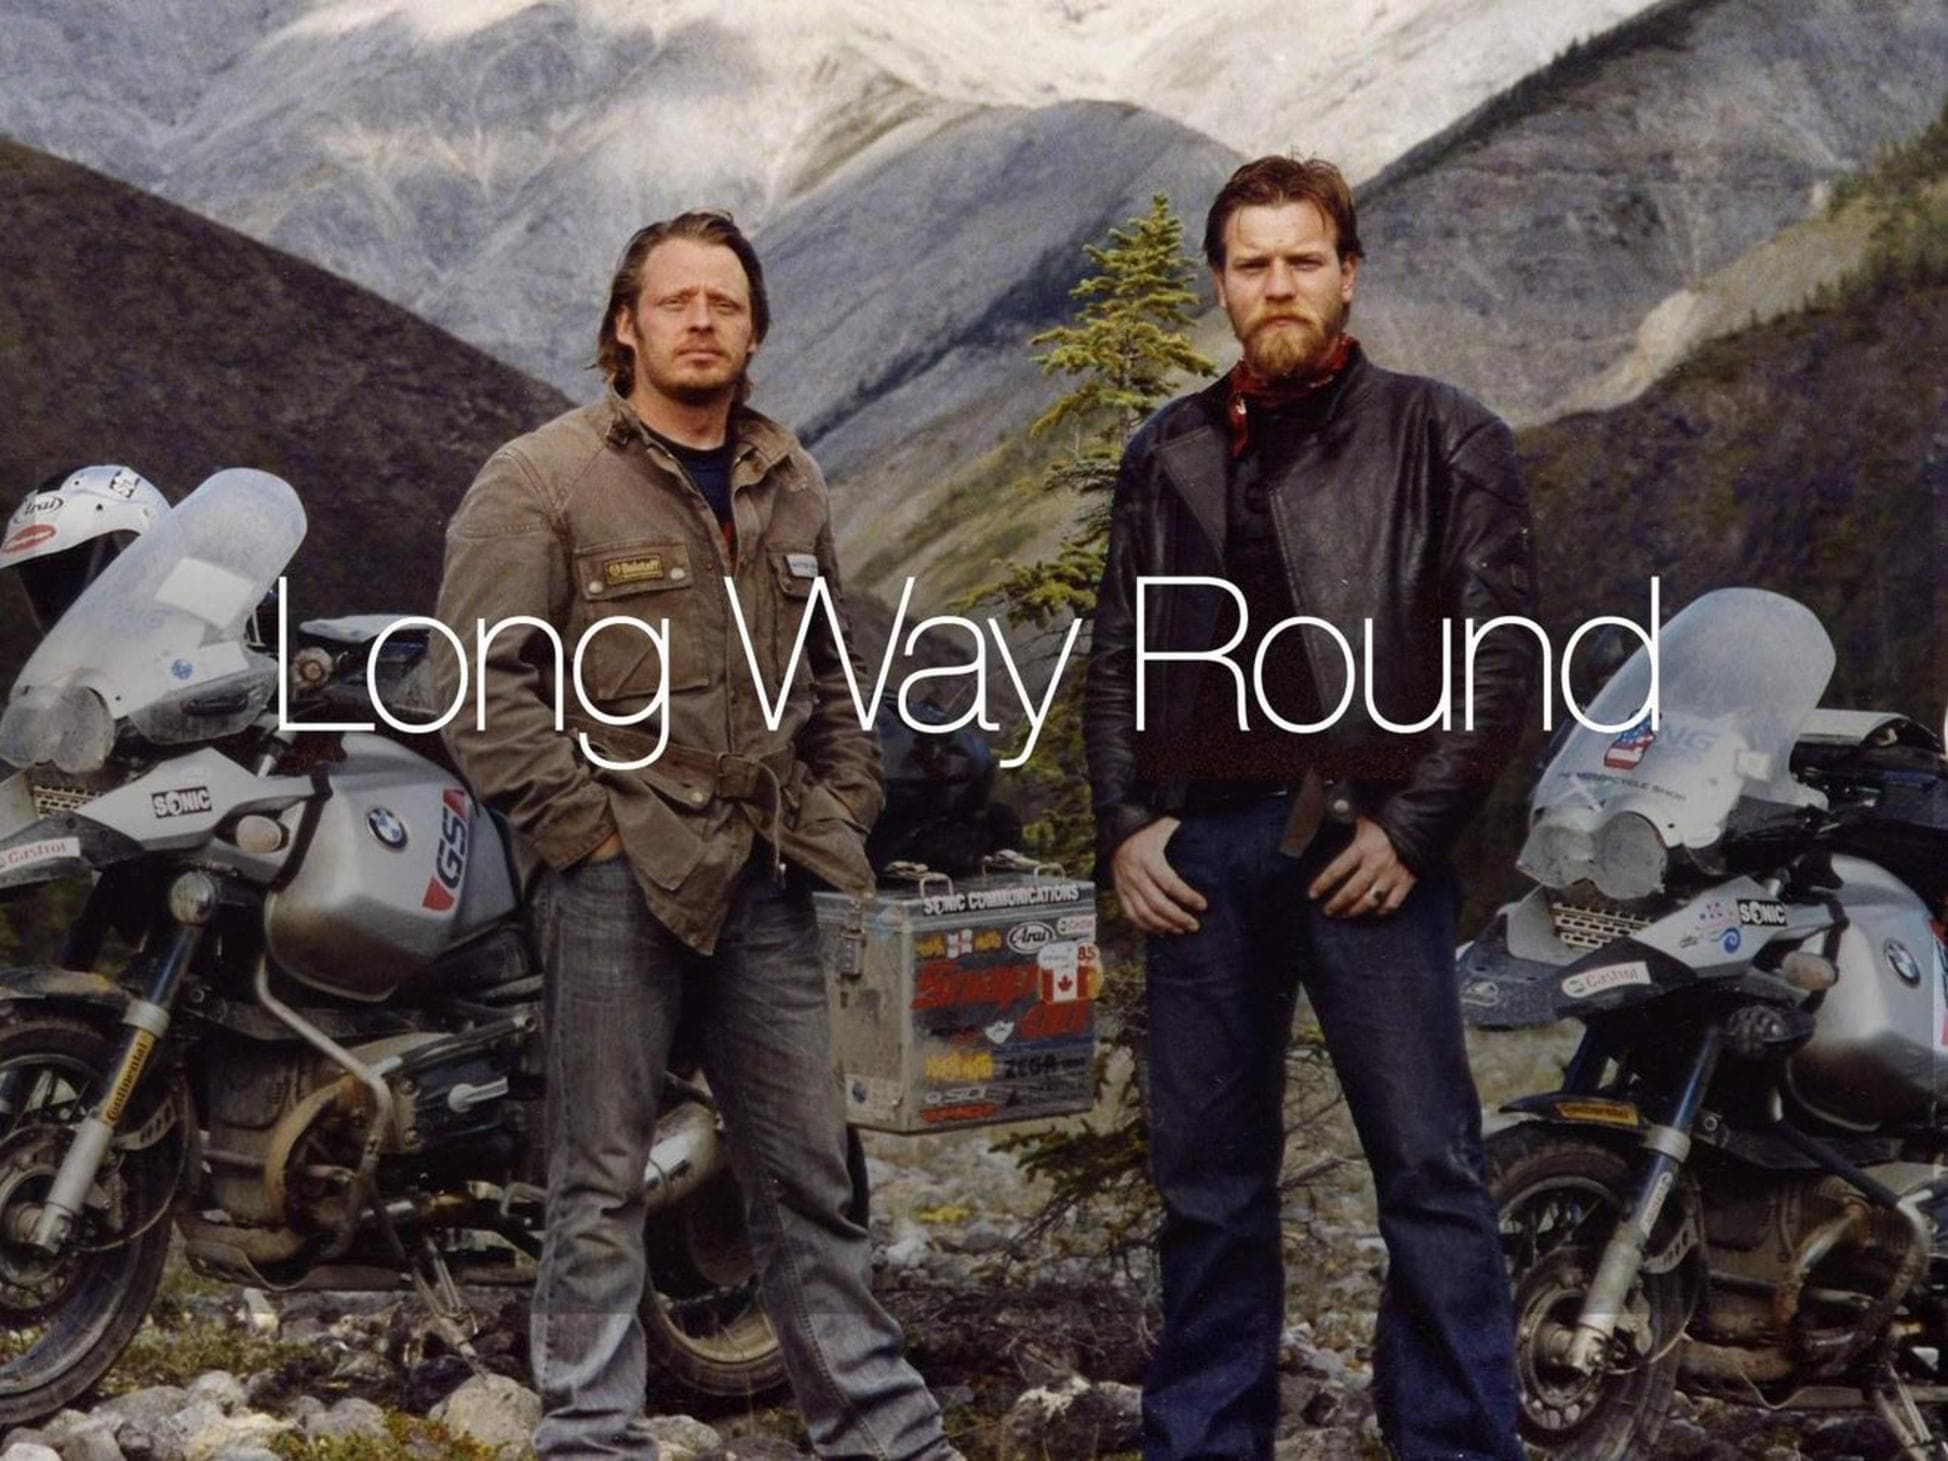 Charley Boorman and Actor Ewan McGregor’s ‘Long Way Up’ Might Use Harley-Davidson LiveWires